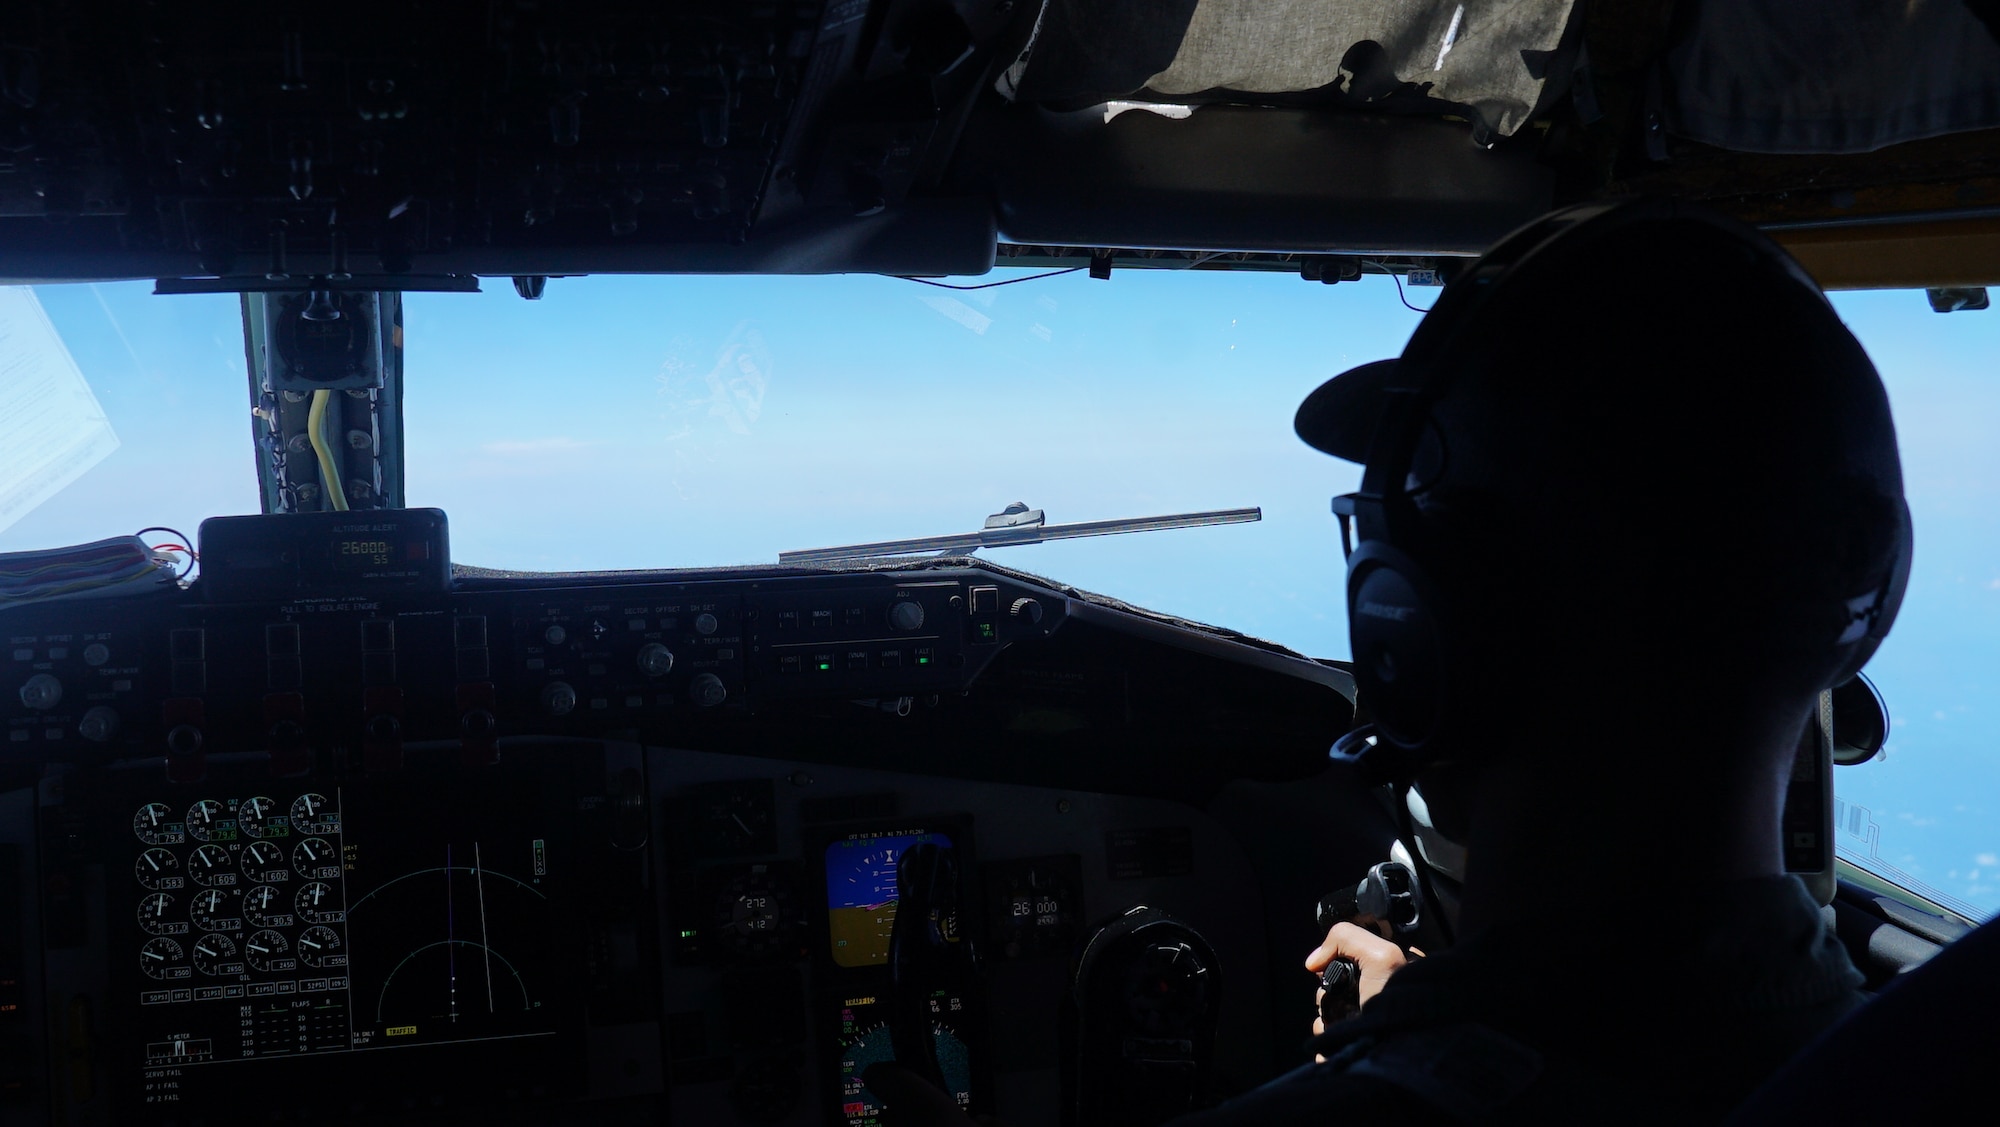 A 161st Air Refueling Wing co-pilot assigned to the 506th Expeditionary Air Refueling Squadron flies a KC-135 Stratotanker from Andersen Air Force Base, Guam in preparation for a Bomber Task Force refueling mission over the Philippine Sea on April 26, 2023. Air-to-air refueling capabilities are a key logistical enabler of U.S., allied, and partner nations’ aircraft, protecting prosperity, peace, and stability across the Pacific. (U.S. Air Force Photo by Capt. Katie Mueller)